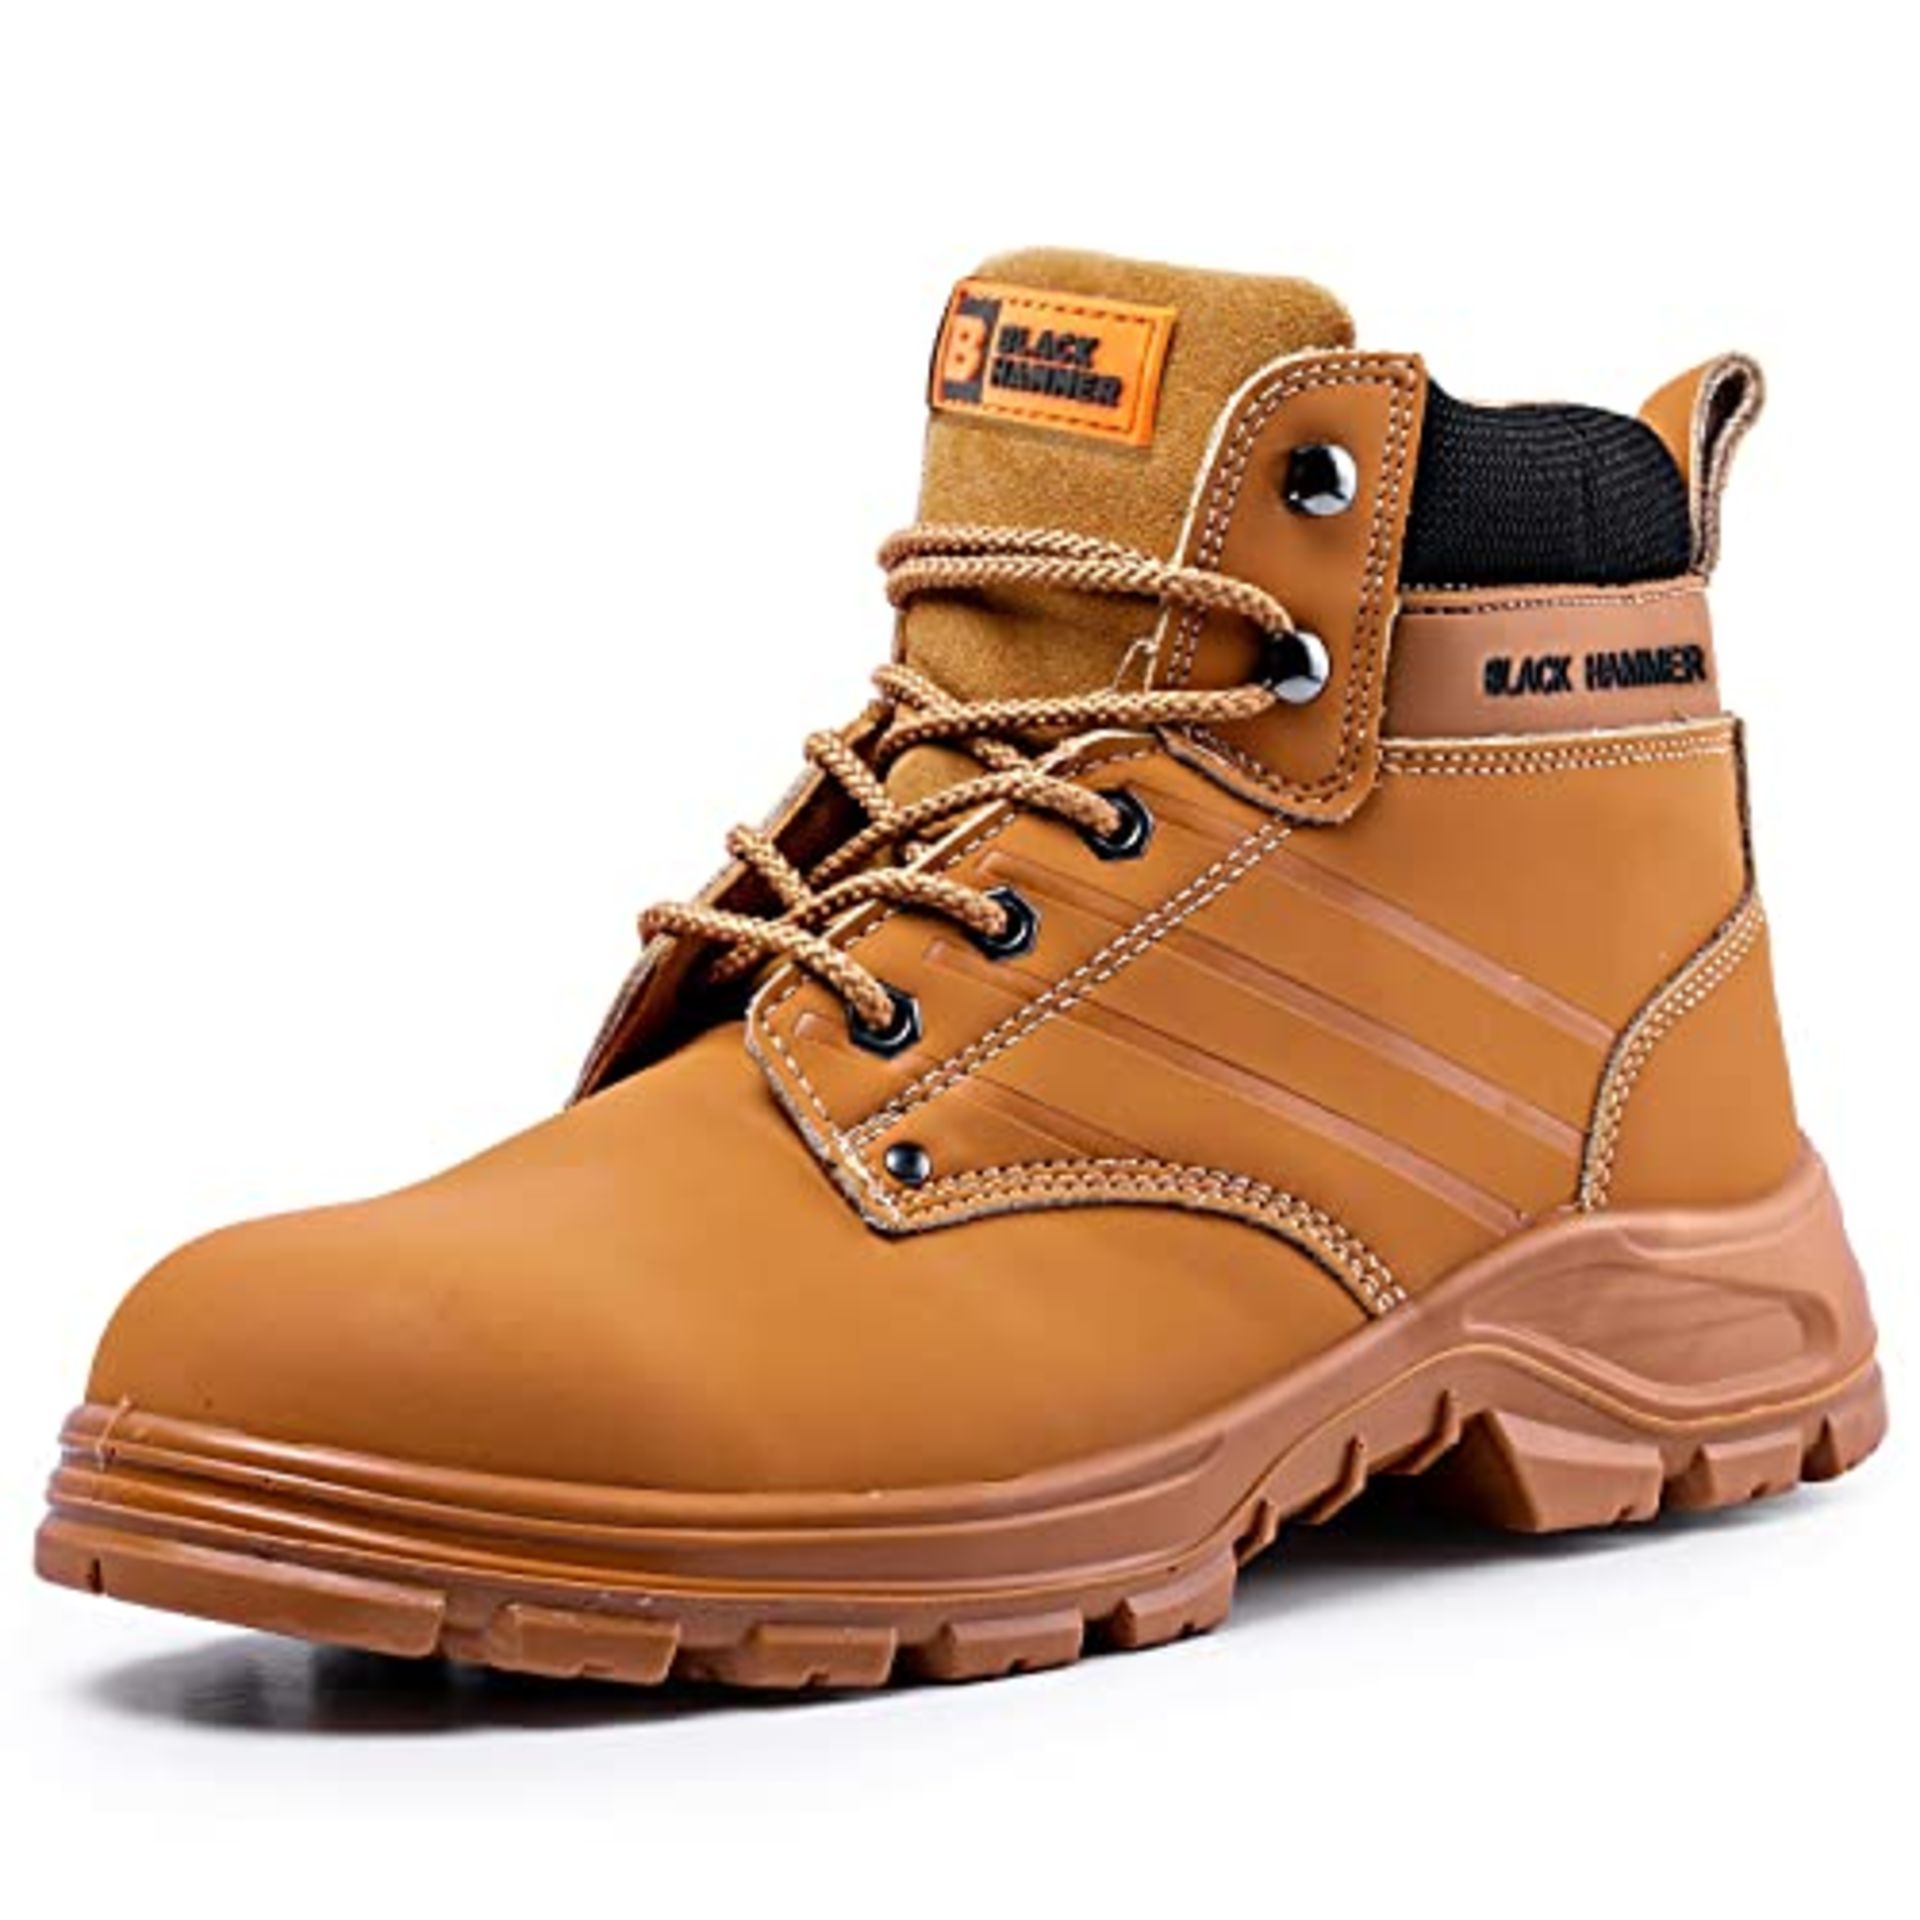 RRP £50.91 Black Hammer Mens Work Boots Tan | Steel toe Cap Safety Boots